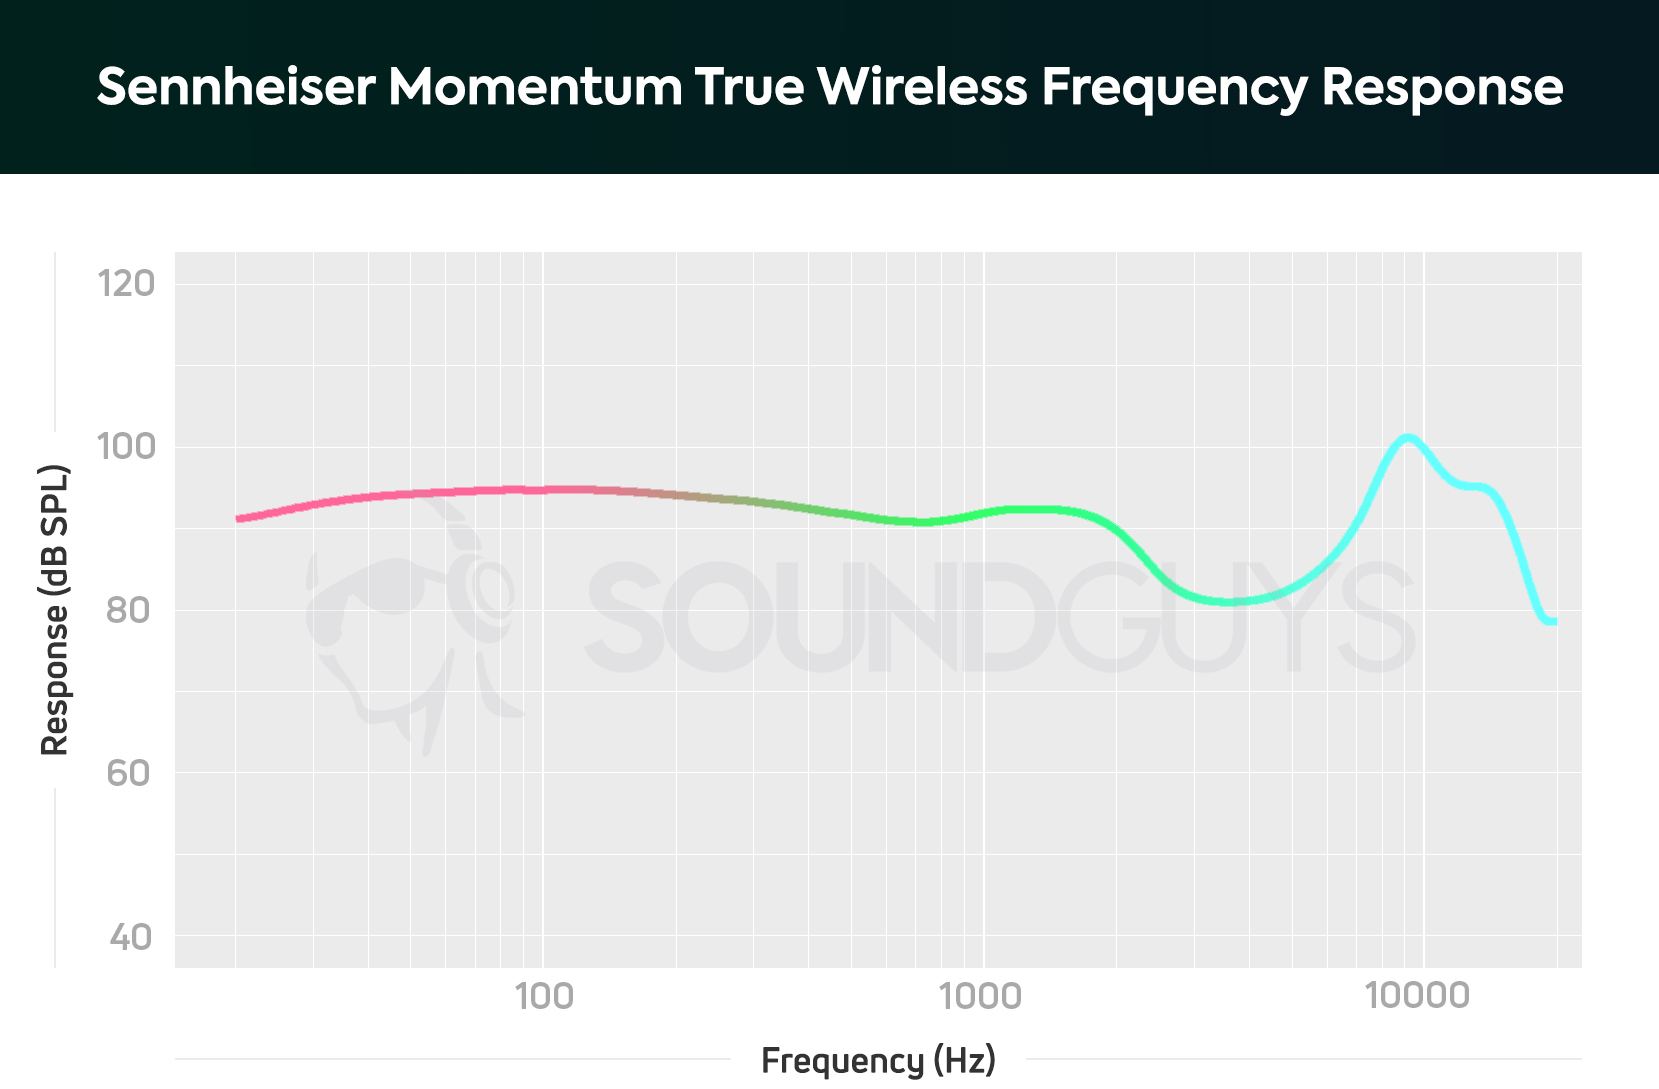 A chart showing the frequency response of the Sennheiser Momentum True Wireless earbuds.